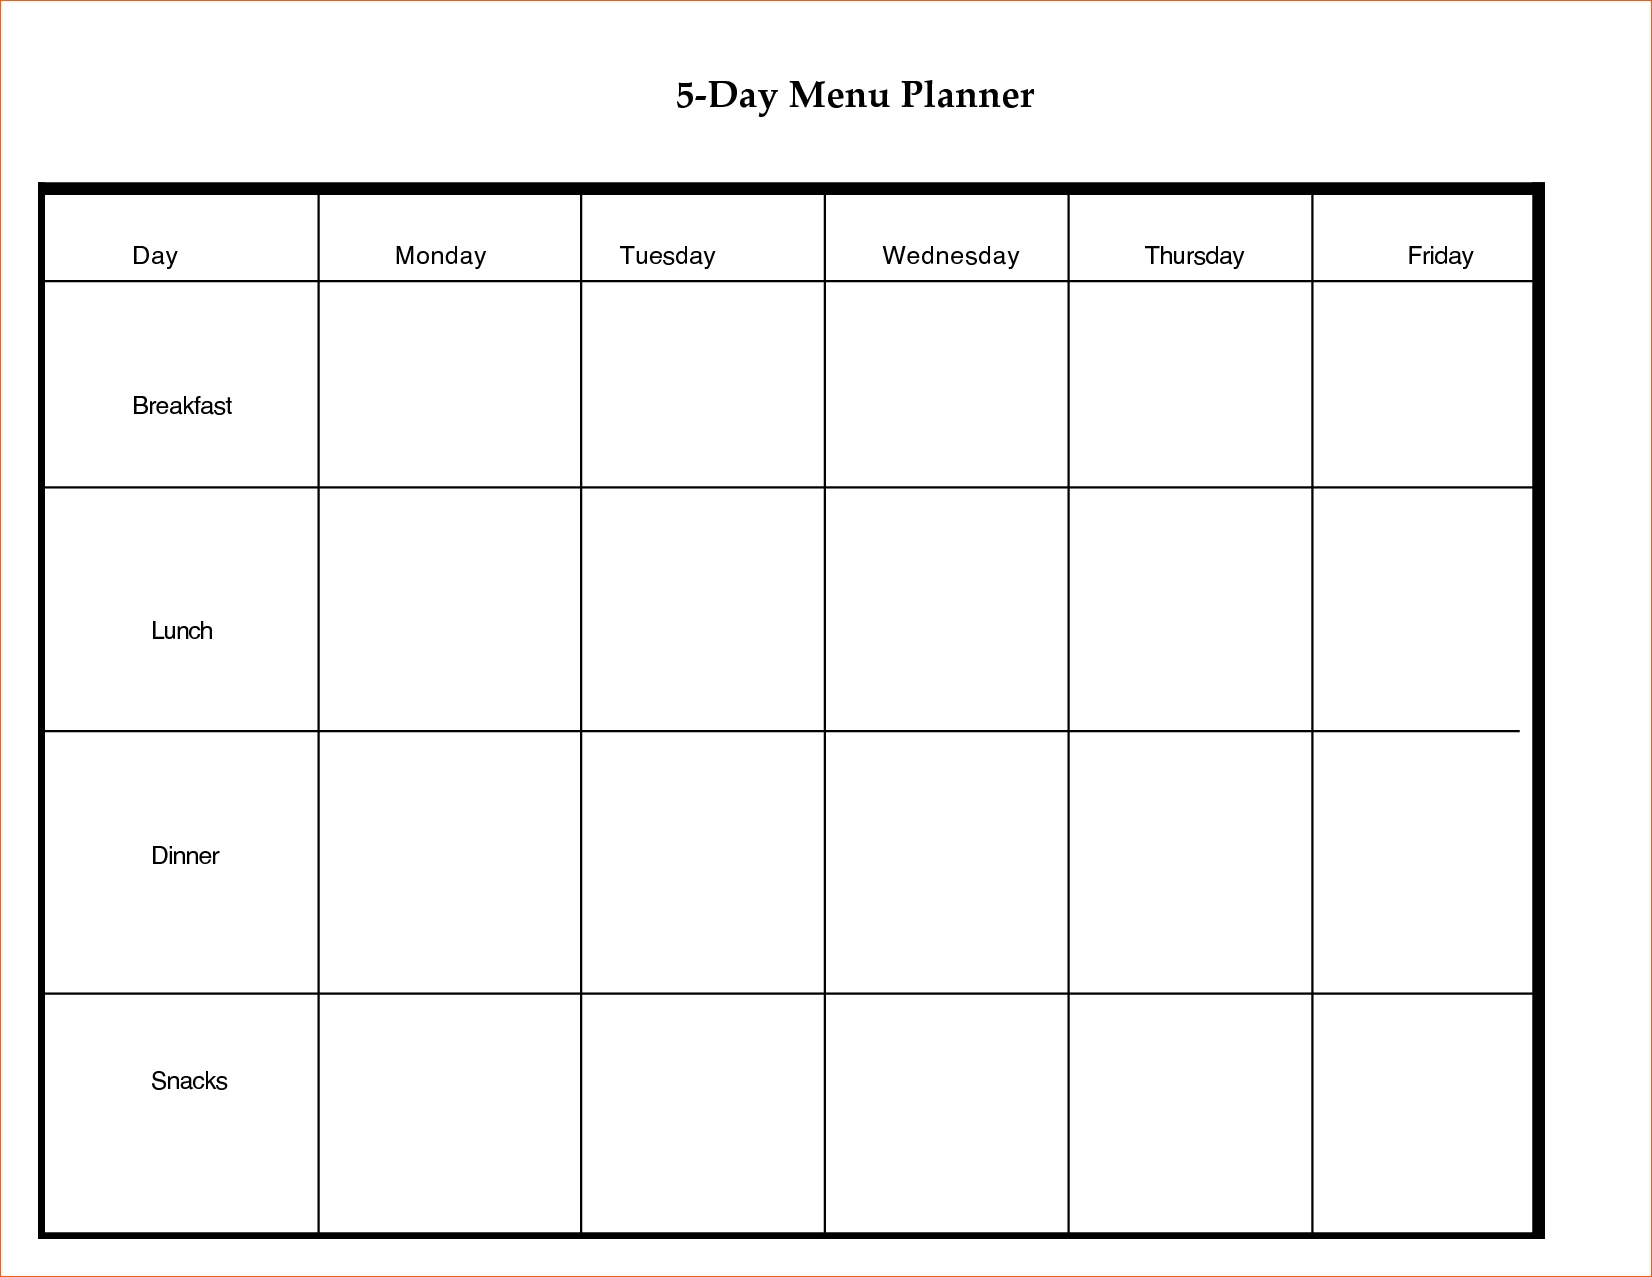 Day Weekly Planner Template Excel Free | Smorad intended for 5 Day Weekly Planner Template Excel